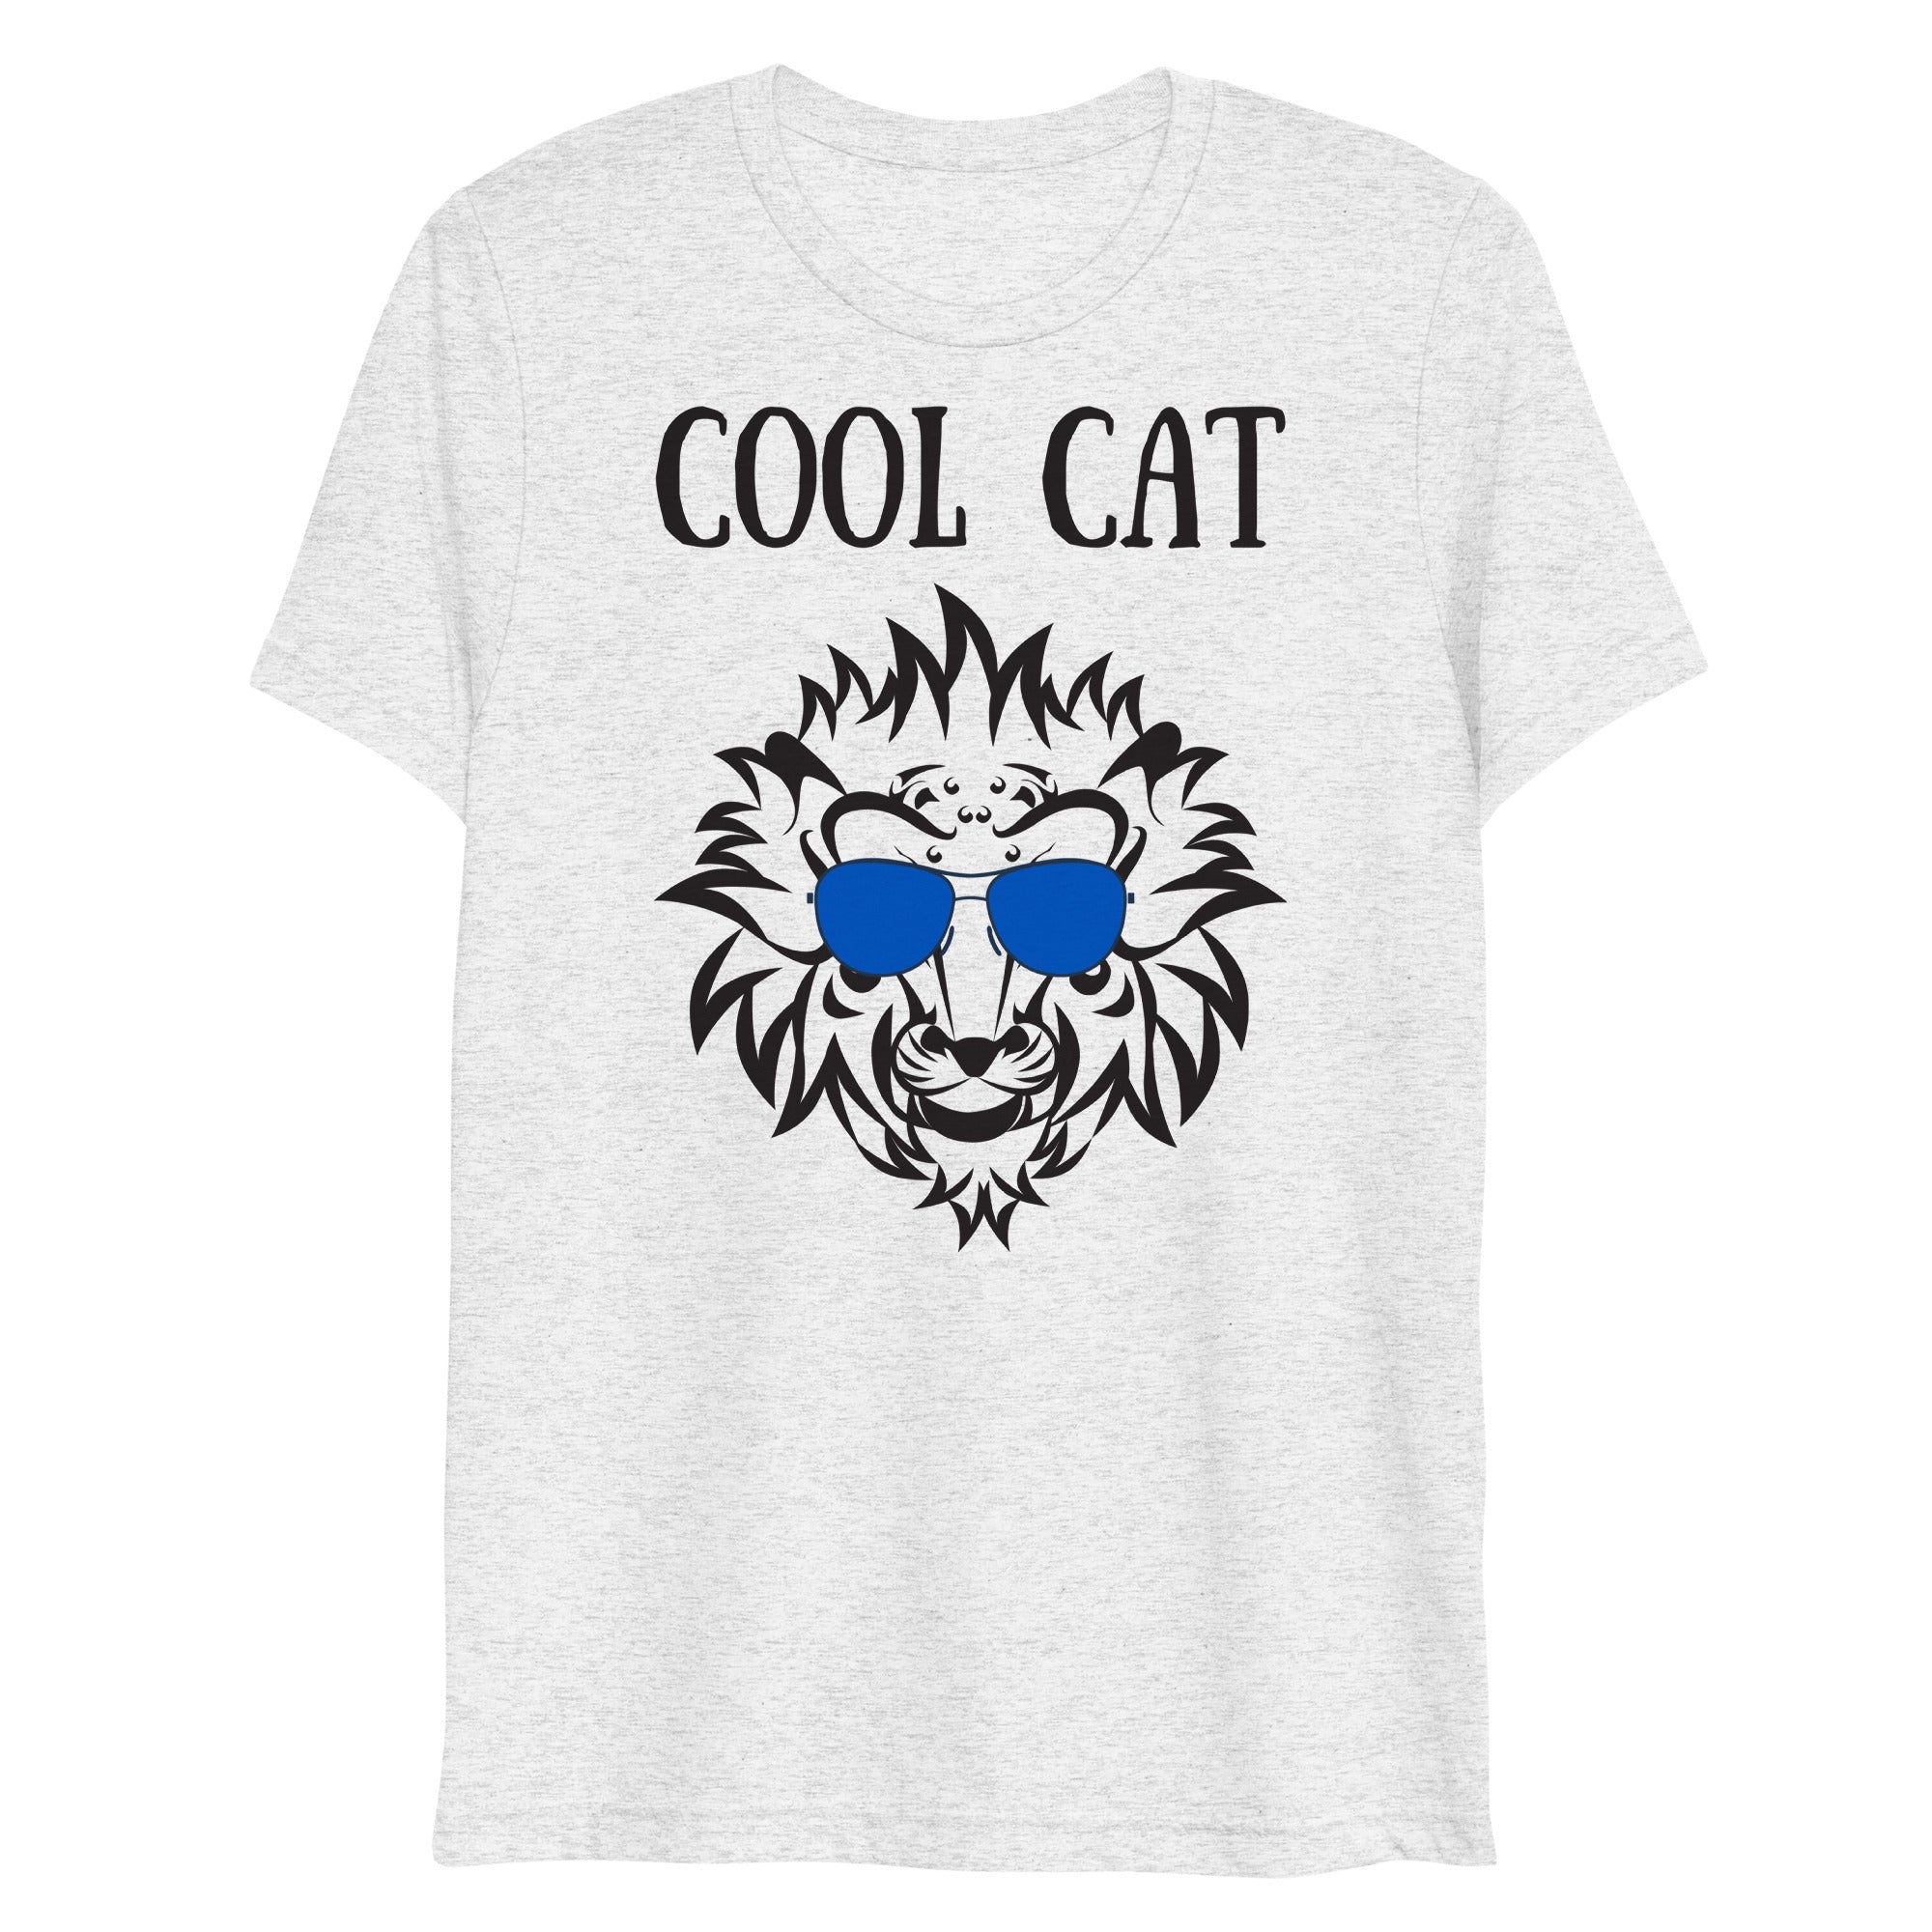 Cool cat graphic t-shirt for men’s